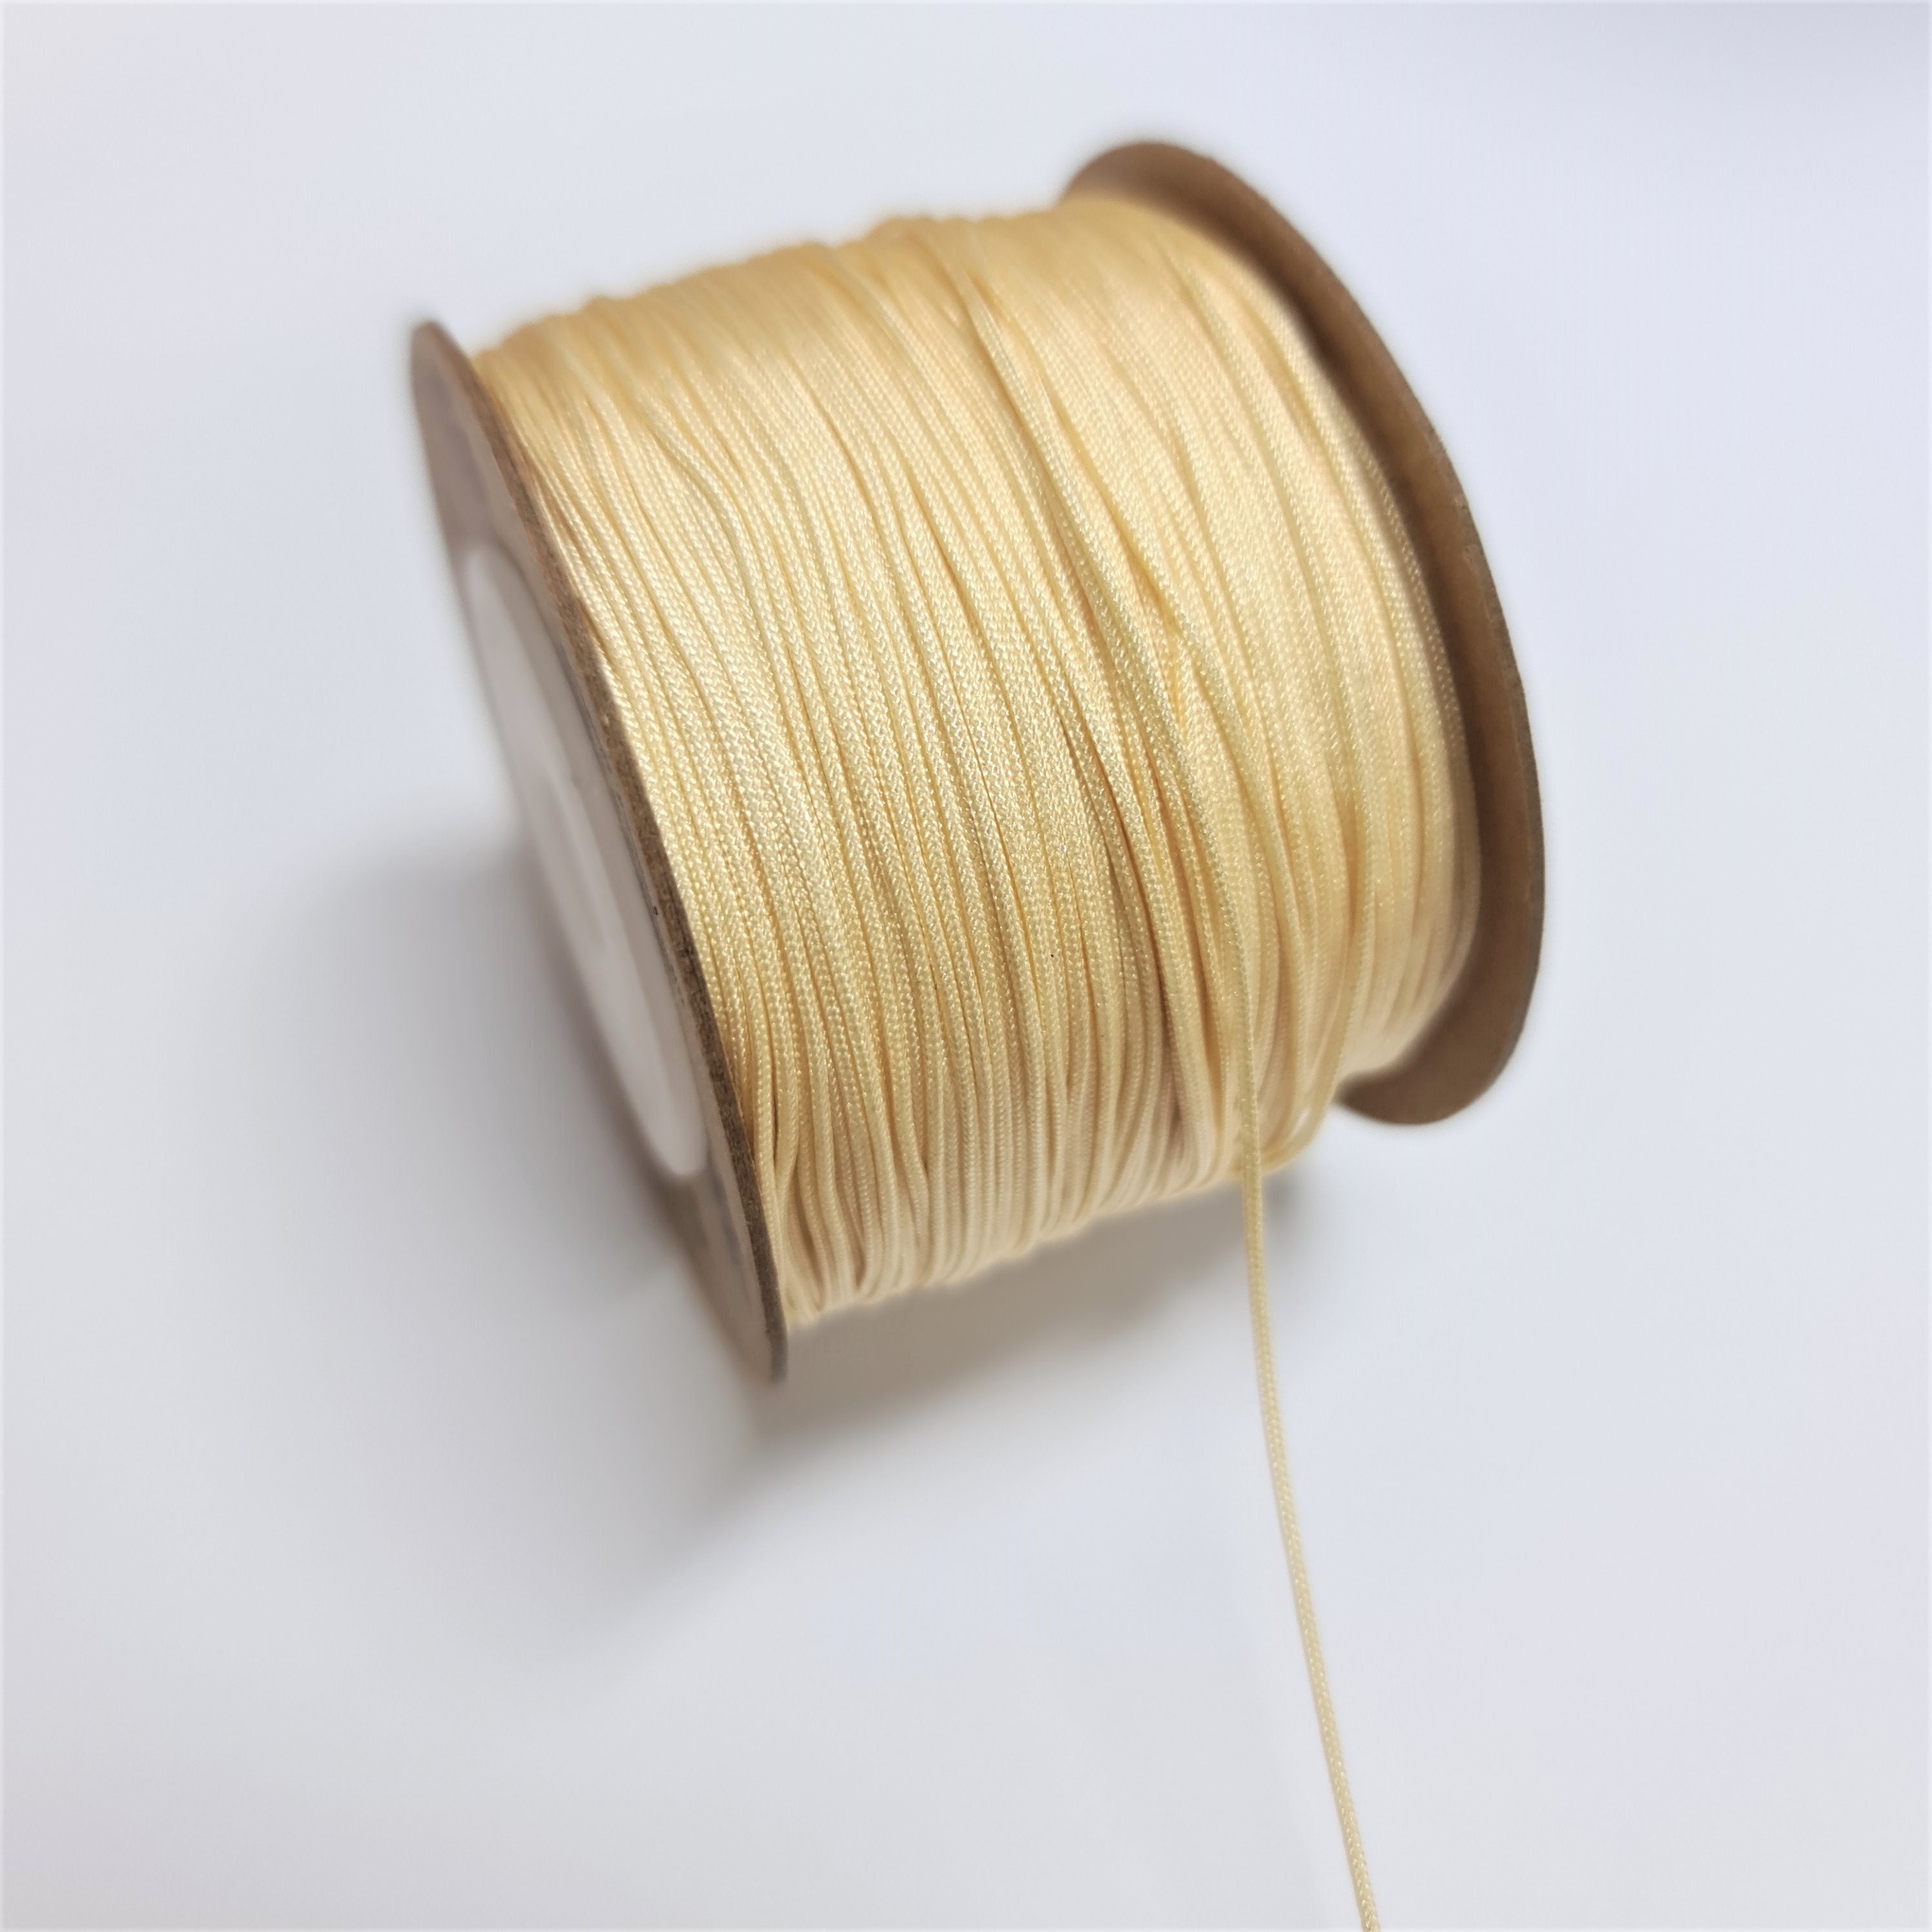 50m Spool (About 164 Feet) of 0.35mm 7-Strand Nylon-Coated